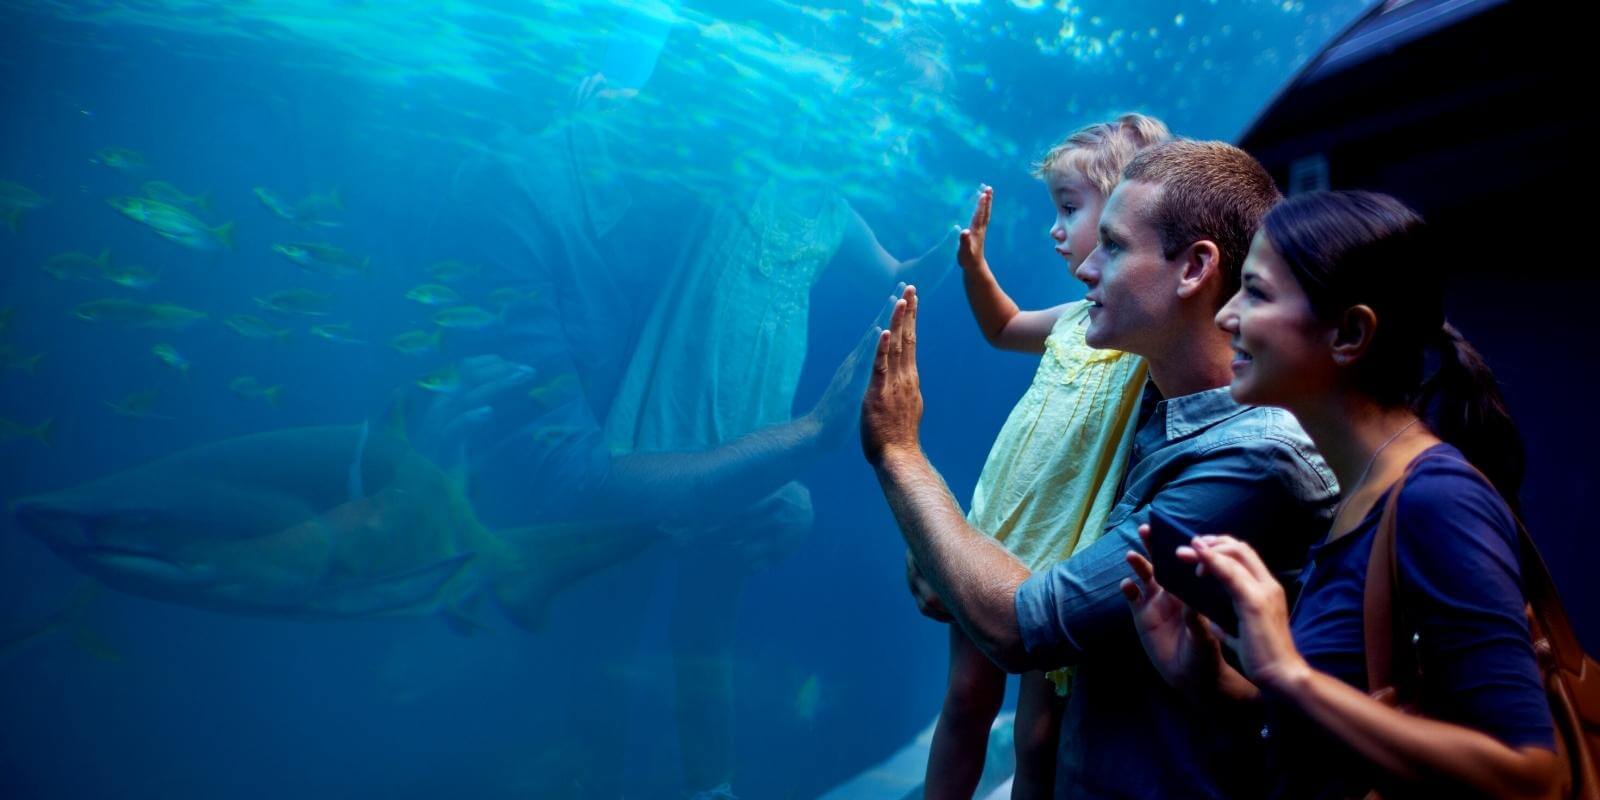 Family Day Weekend in Vancouver Aquarium